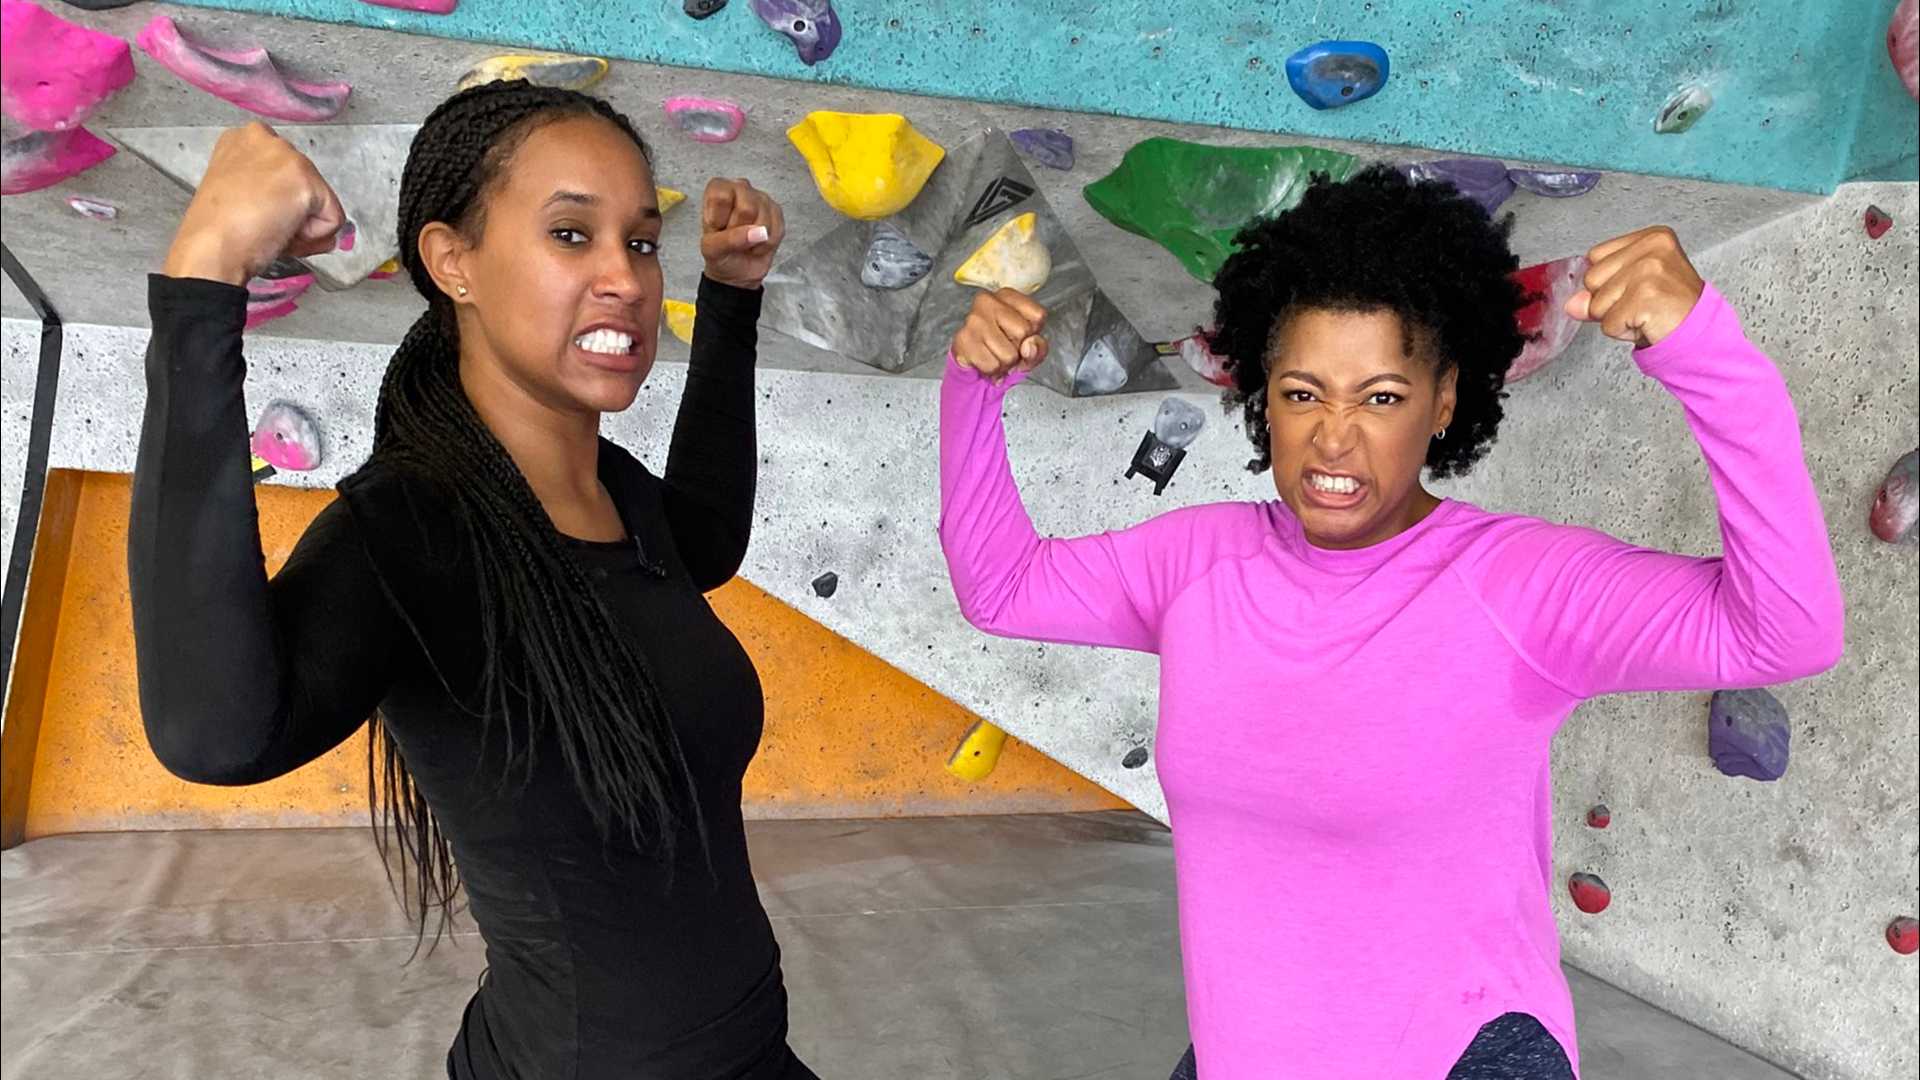 T-Pot joined Sheba for a lot of climbing (and falling) at the New Orleans boulder Lounge on St. Claude. She shared some of her best and worst interviews.